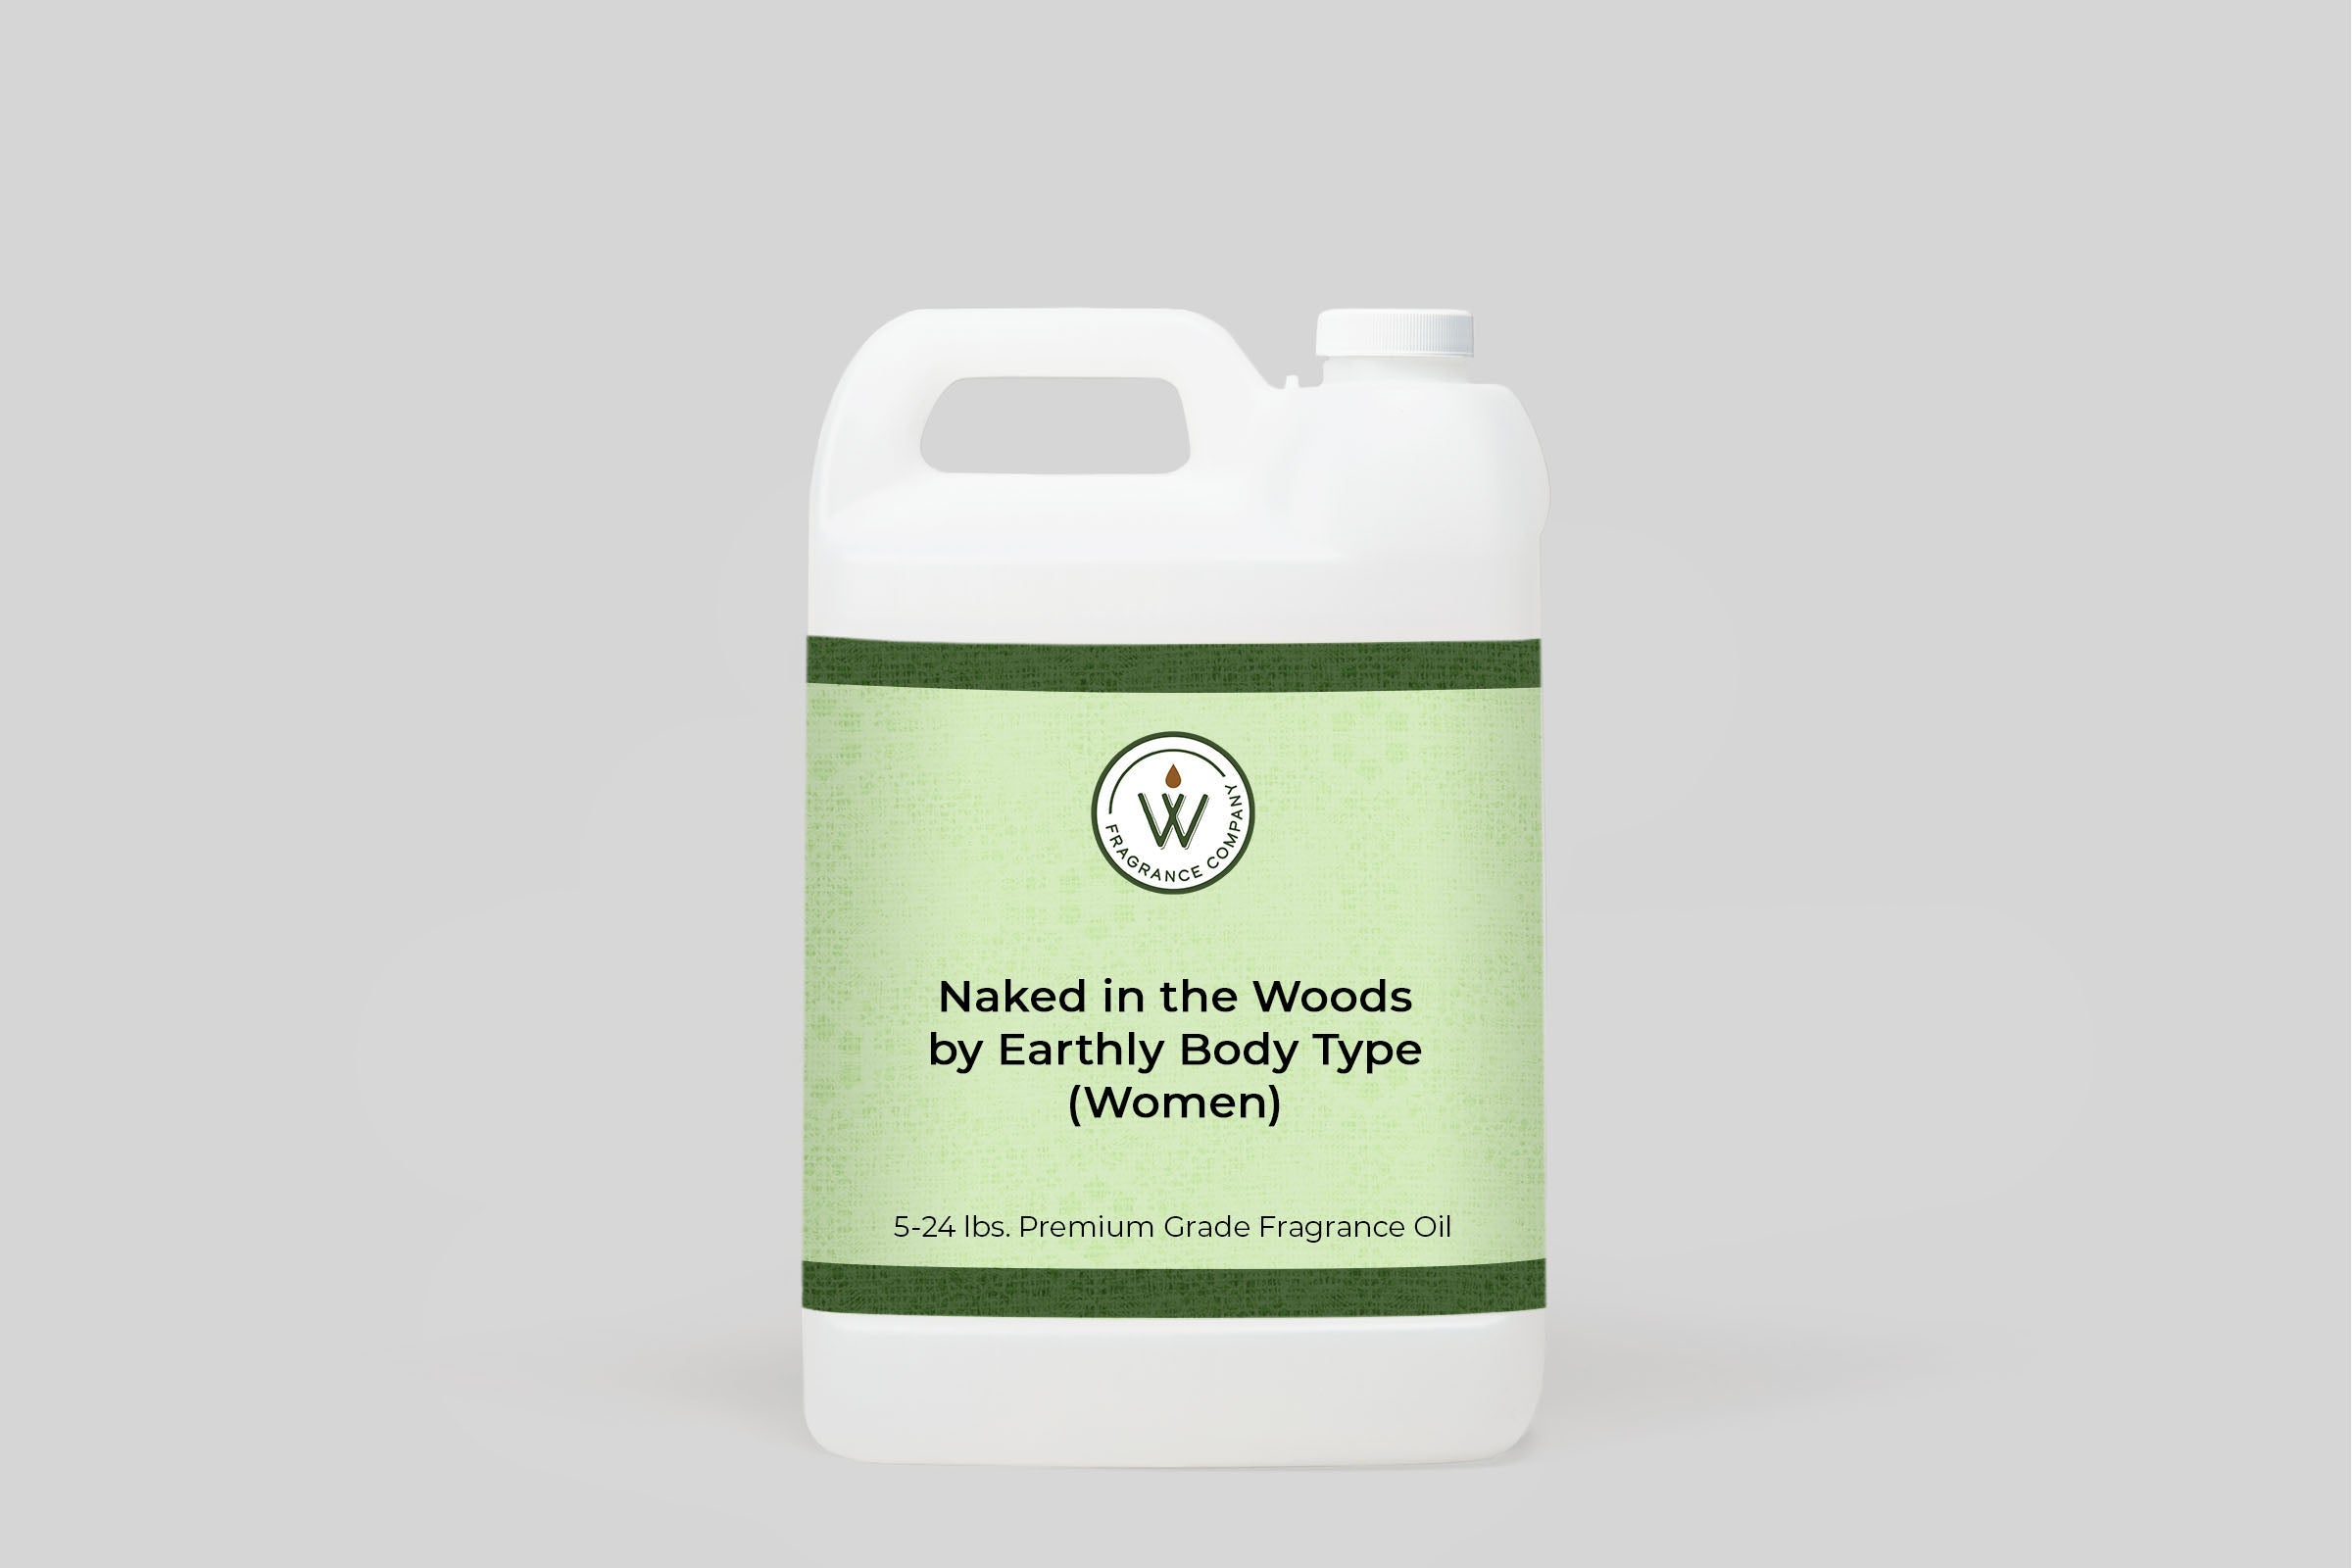 Naked in the Woods by Earthly Body Type (women) Fragrance Oil